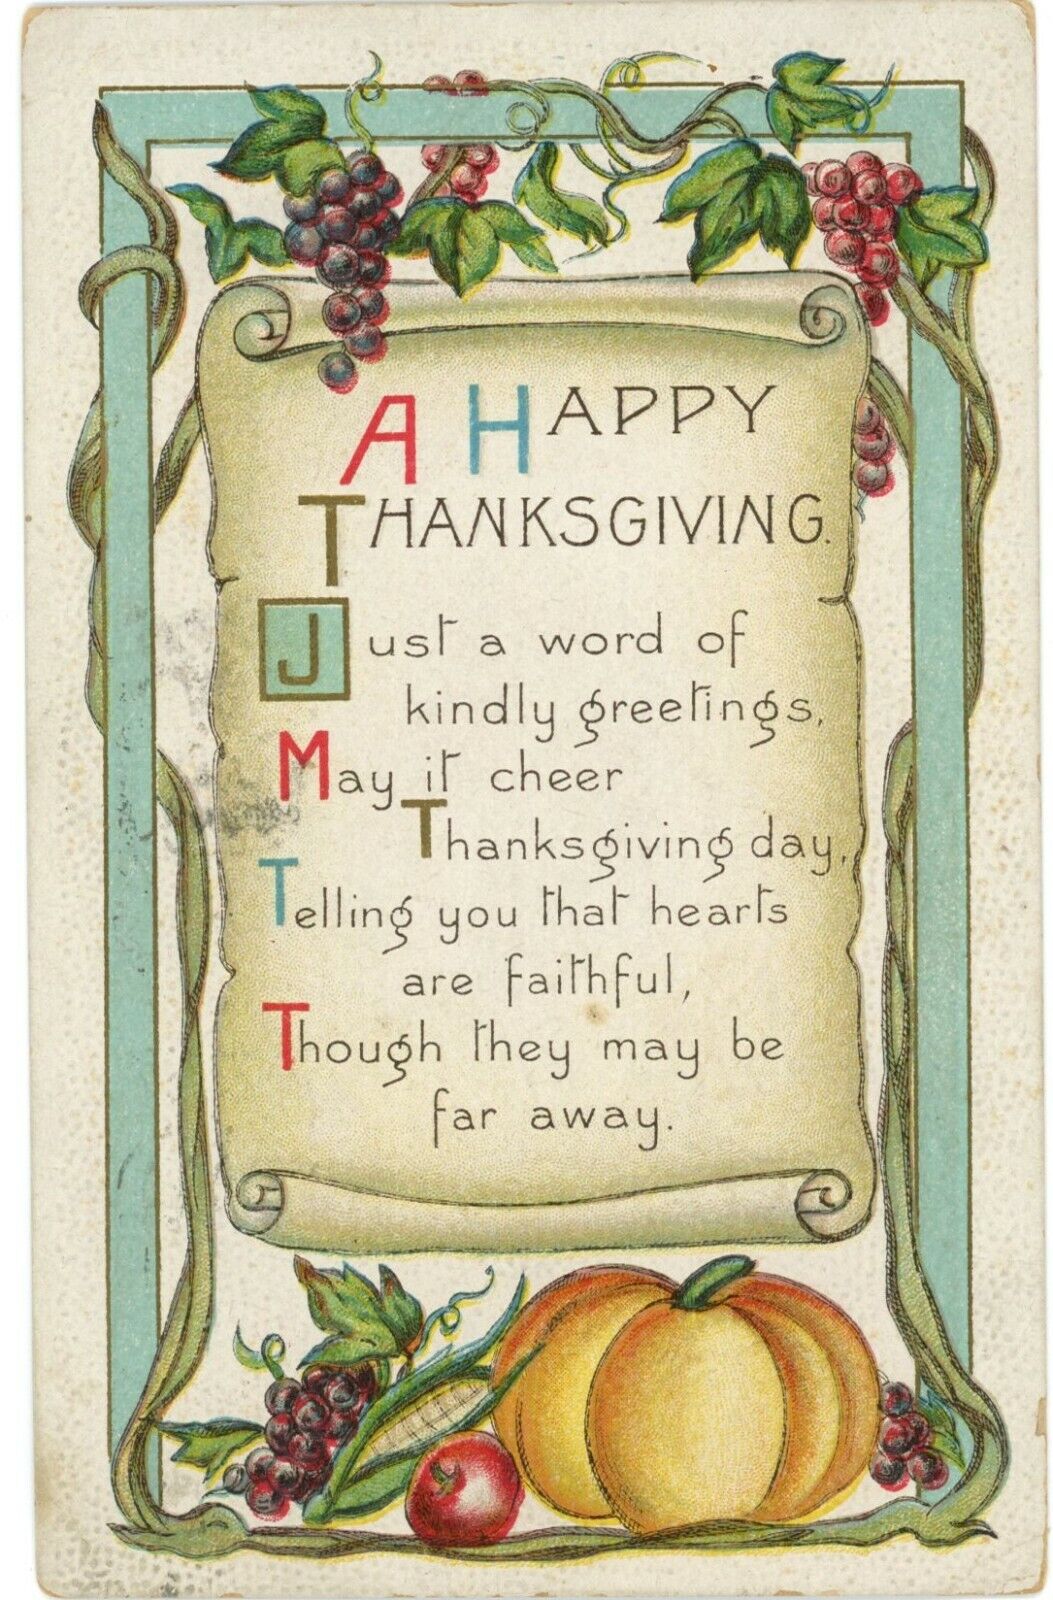 A Happy Thanksgiving Kindly Greetings Pumpkin, Corn And Harvest 1917 Postcard